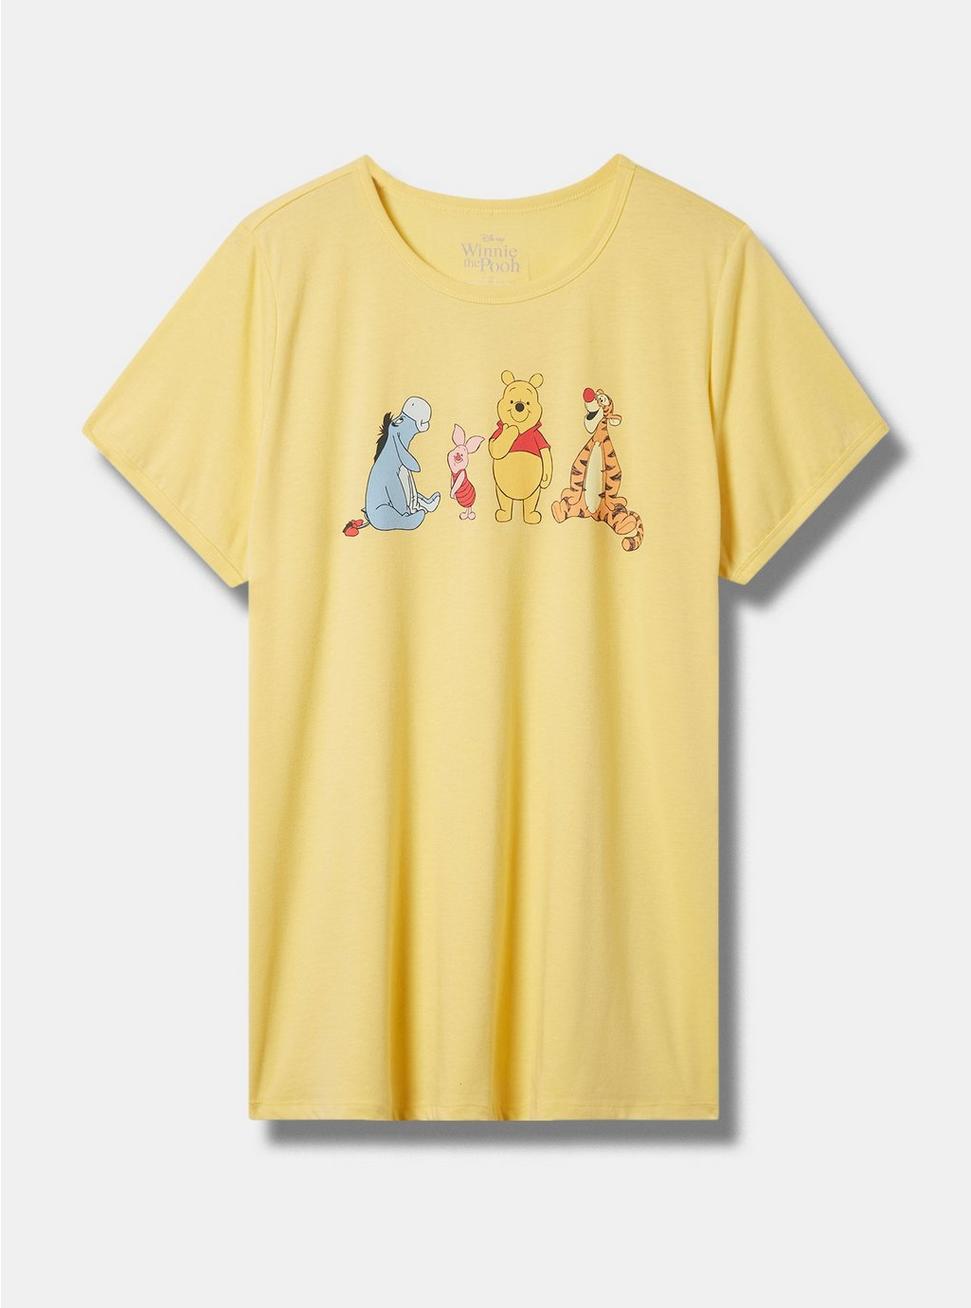 Winnie the Pooh Classic Fit Cotton Ringer Tee, SUNDRESS, hi-res